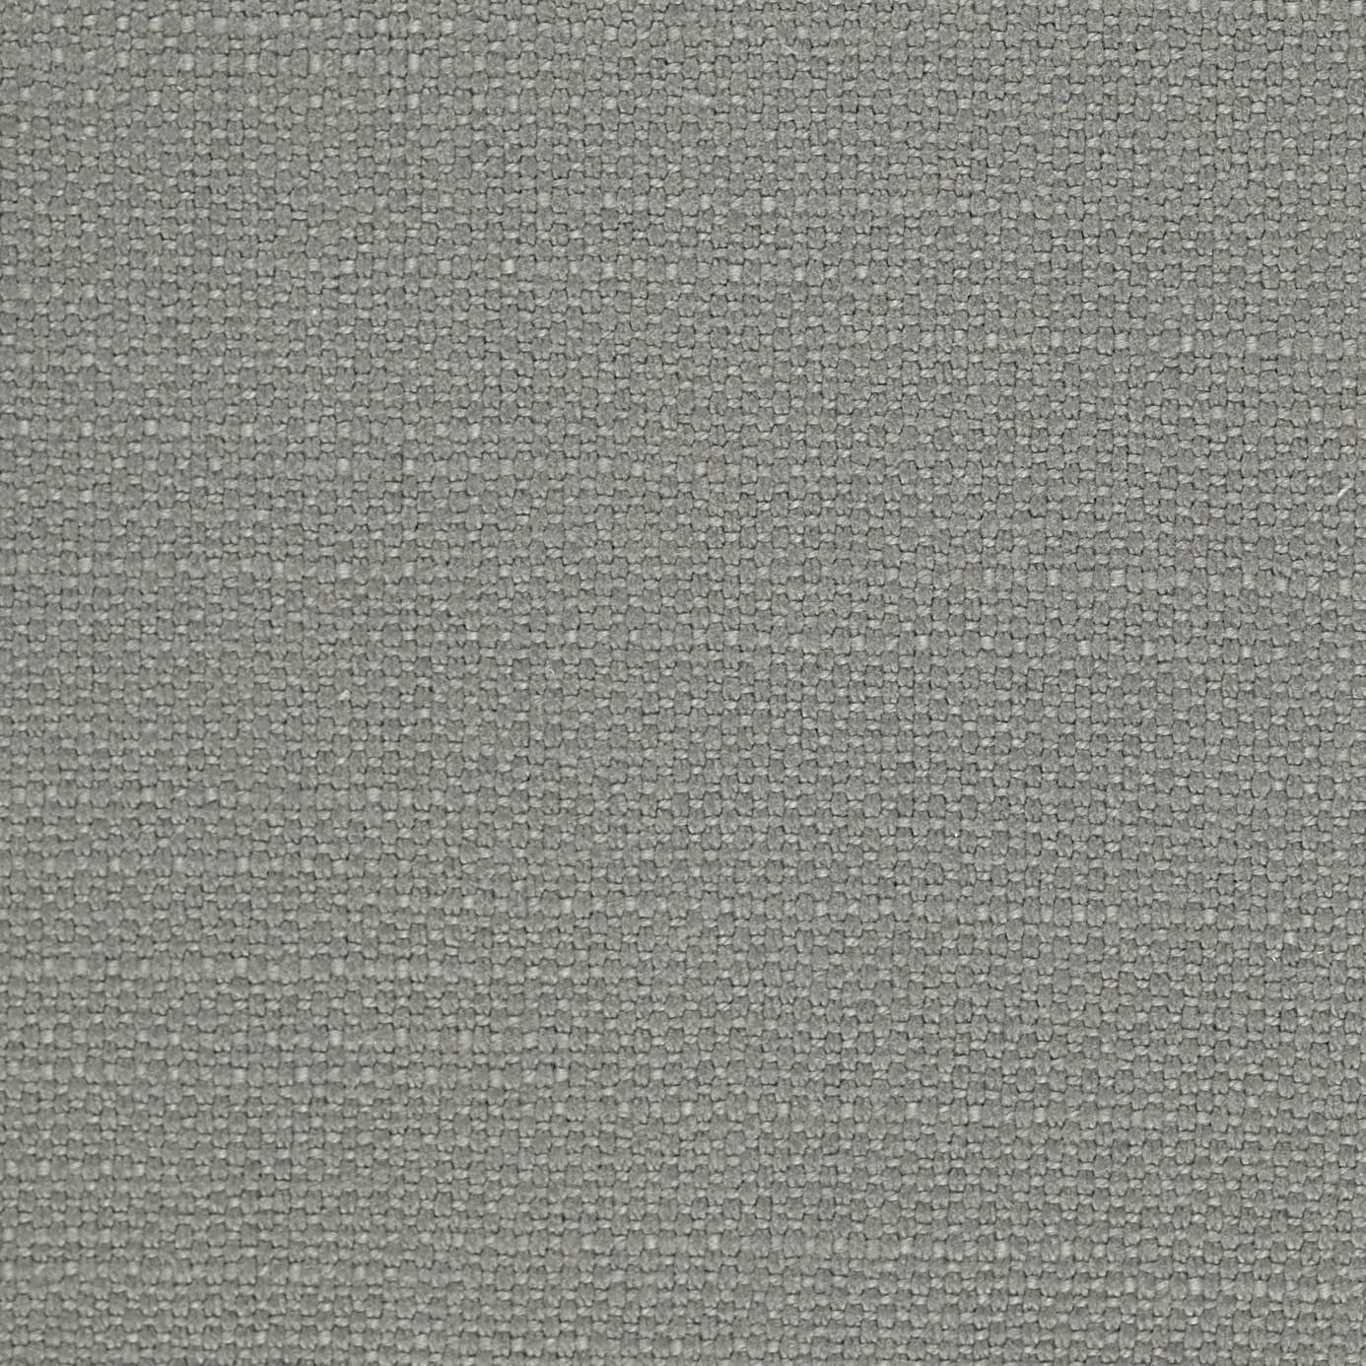 Frequency Titanium Fabric by HAR